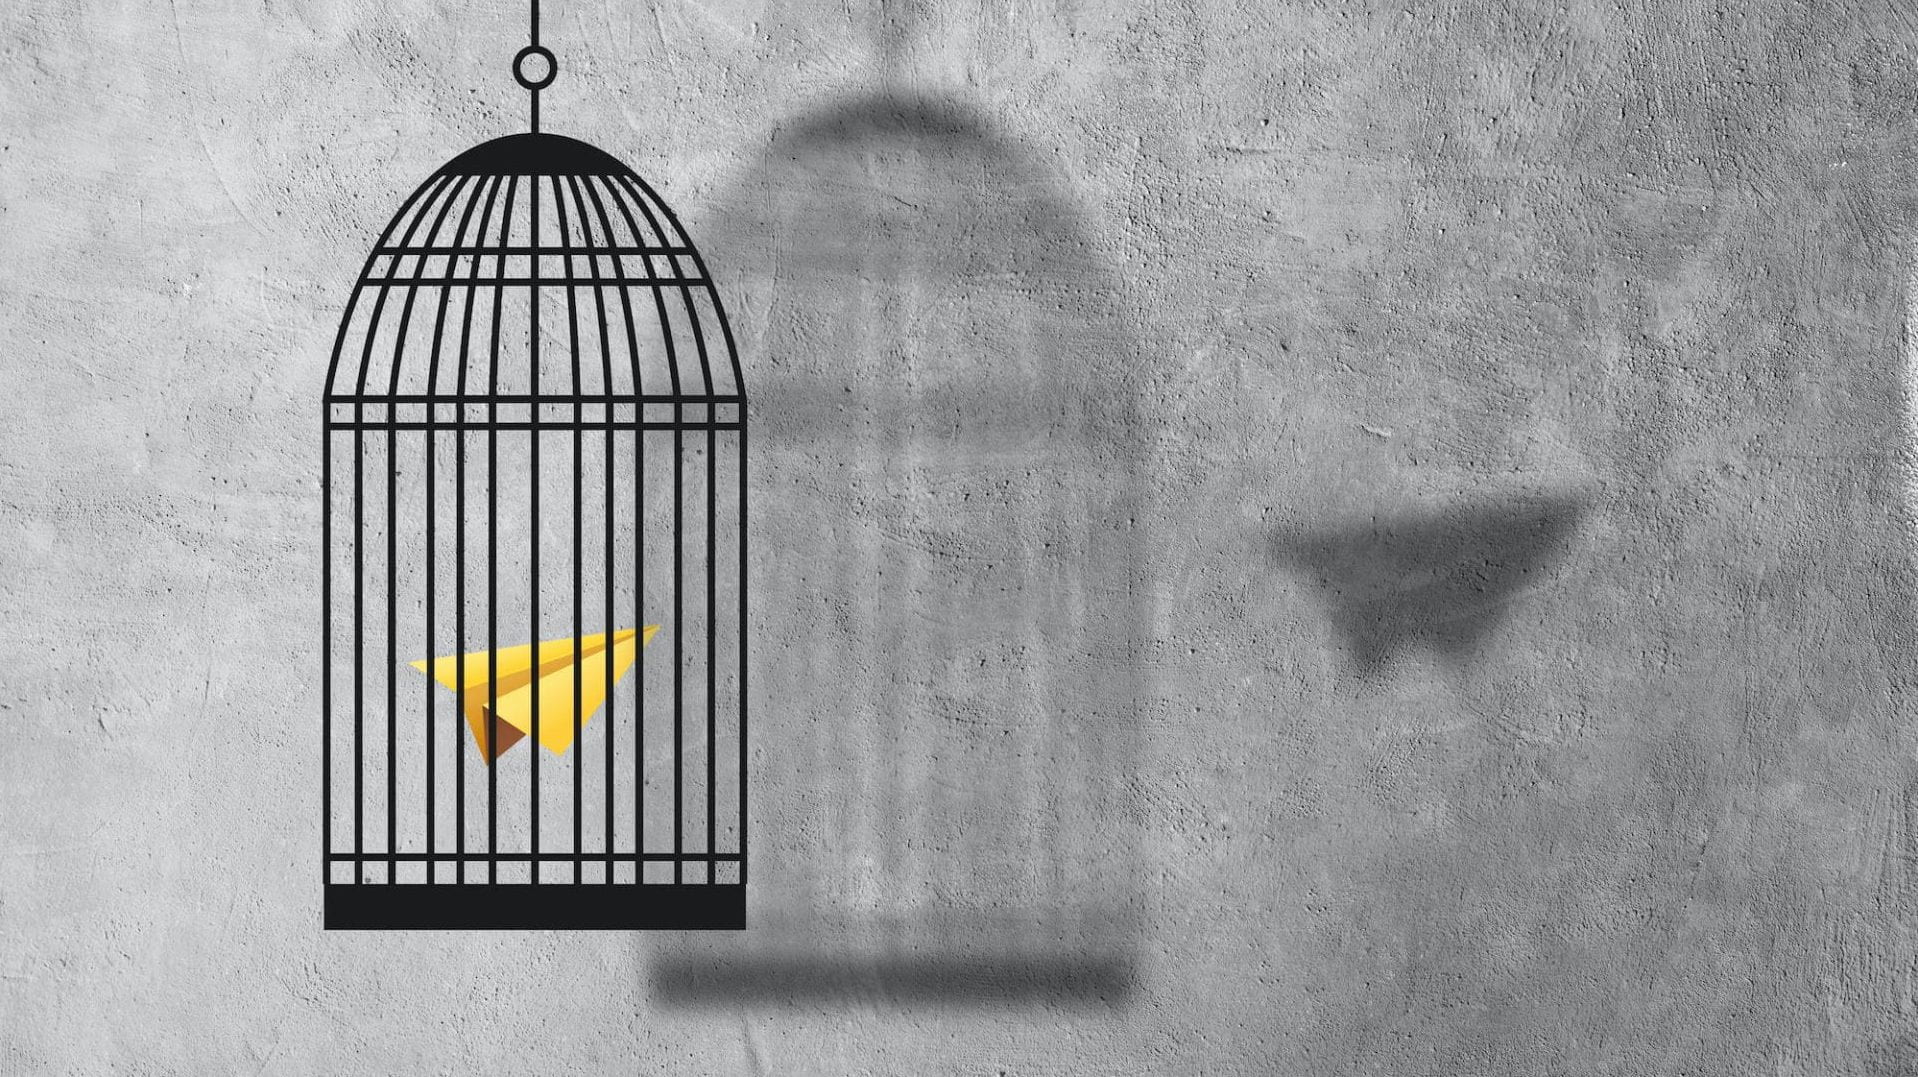 A paper airplane in a cage with a shadow projected on the wall of the cage and the airplane flying free